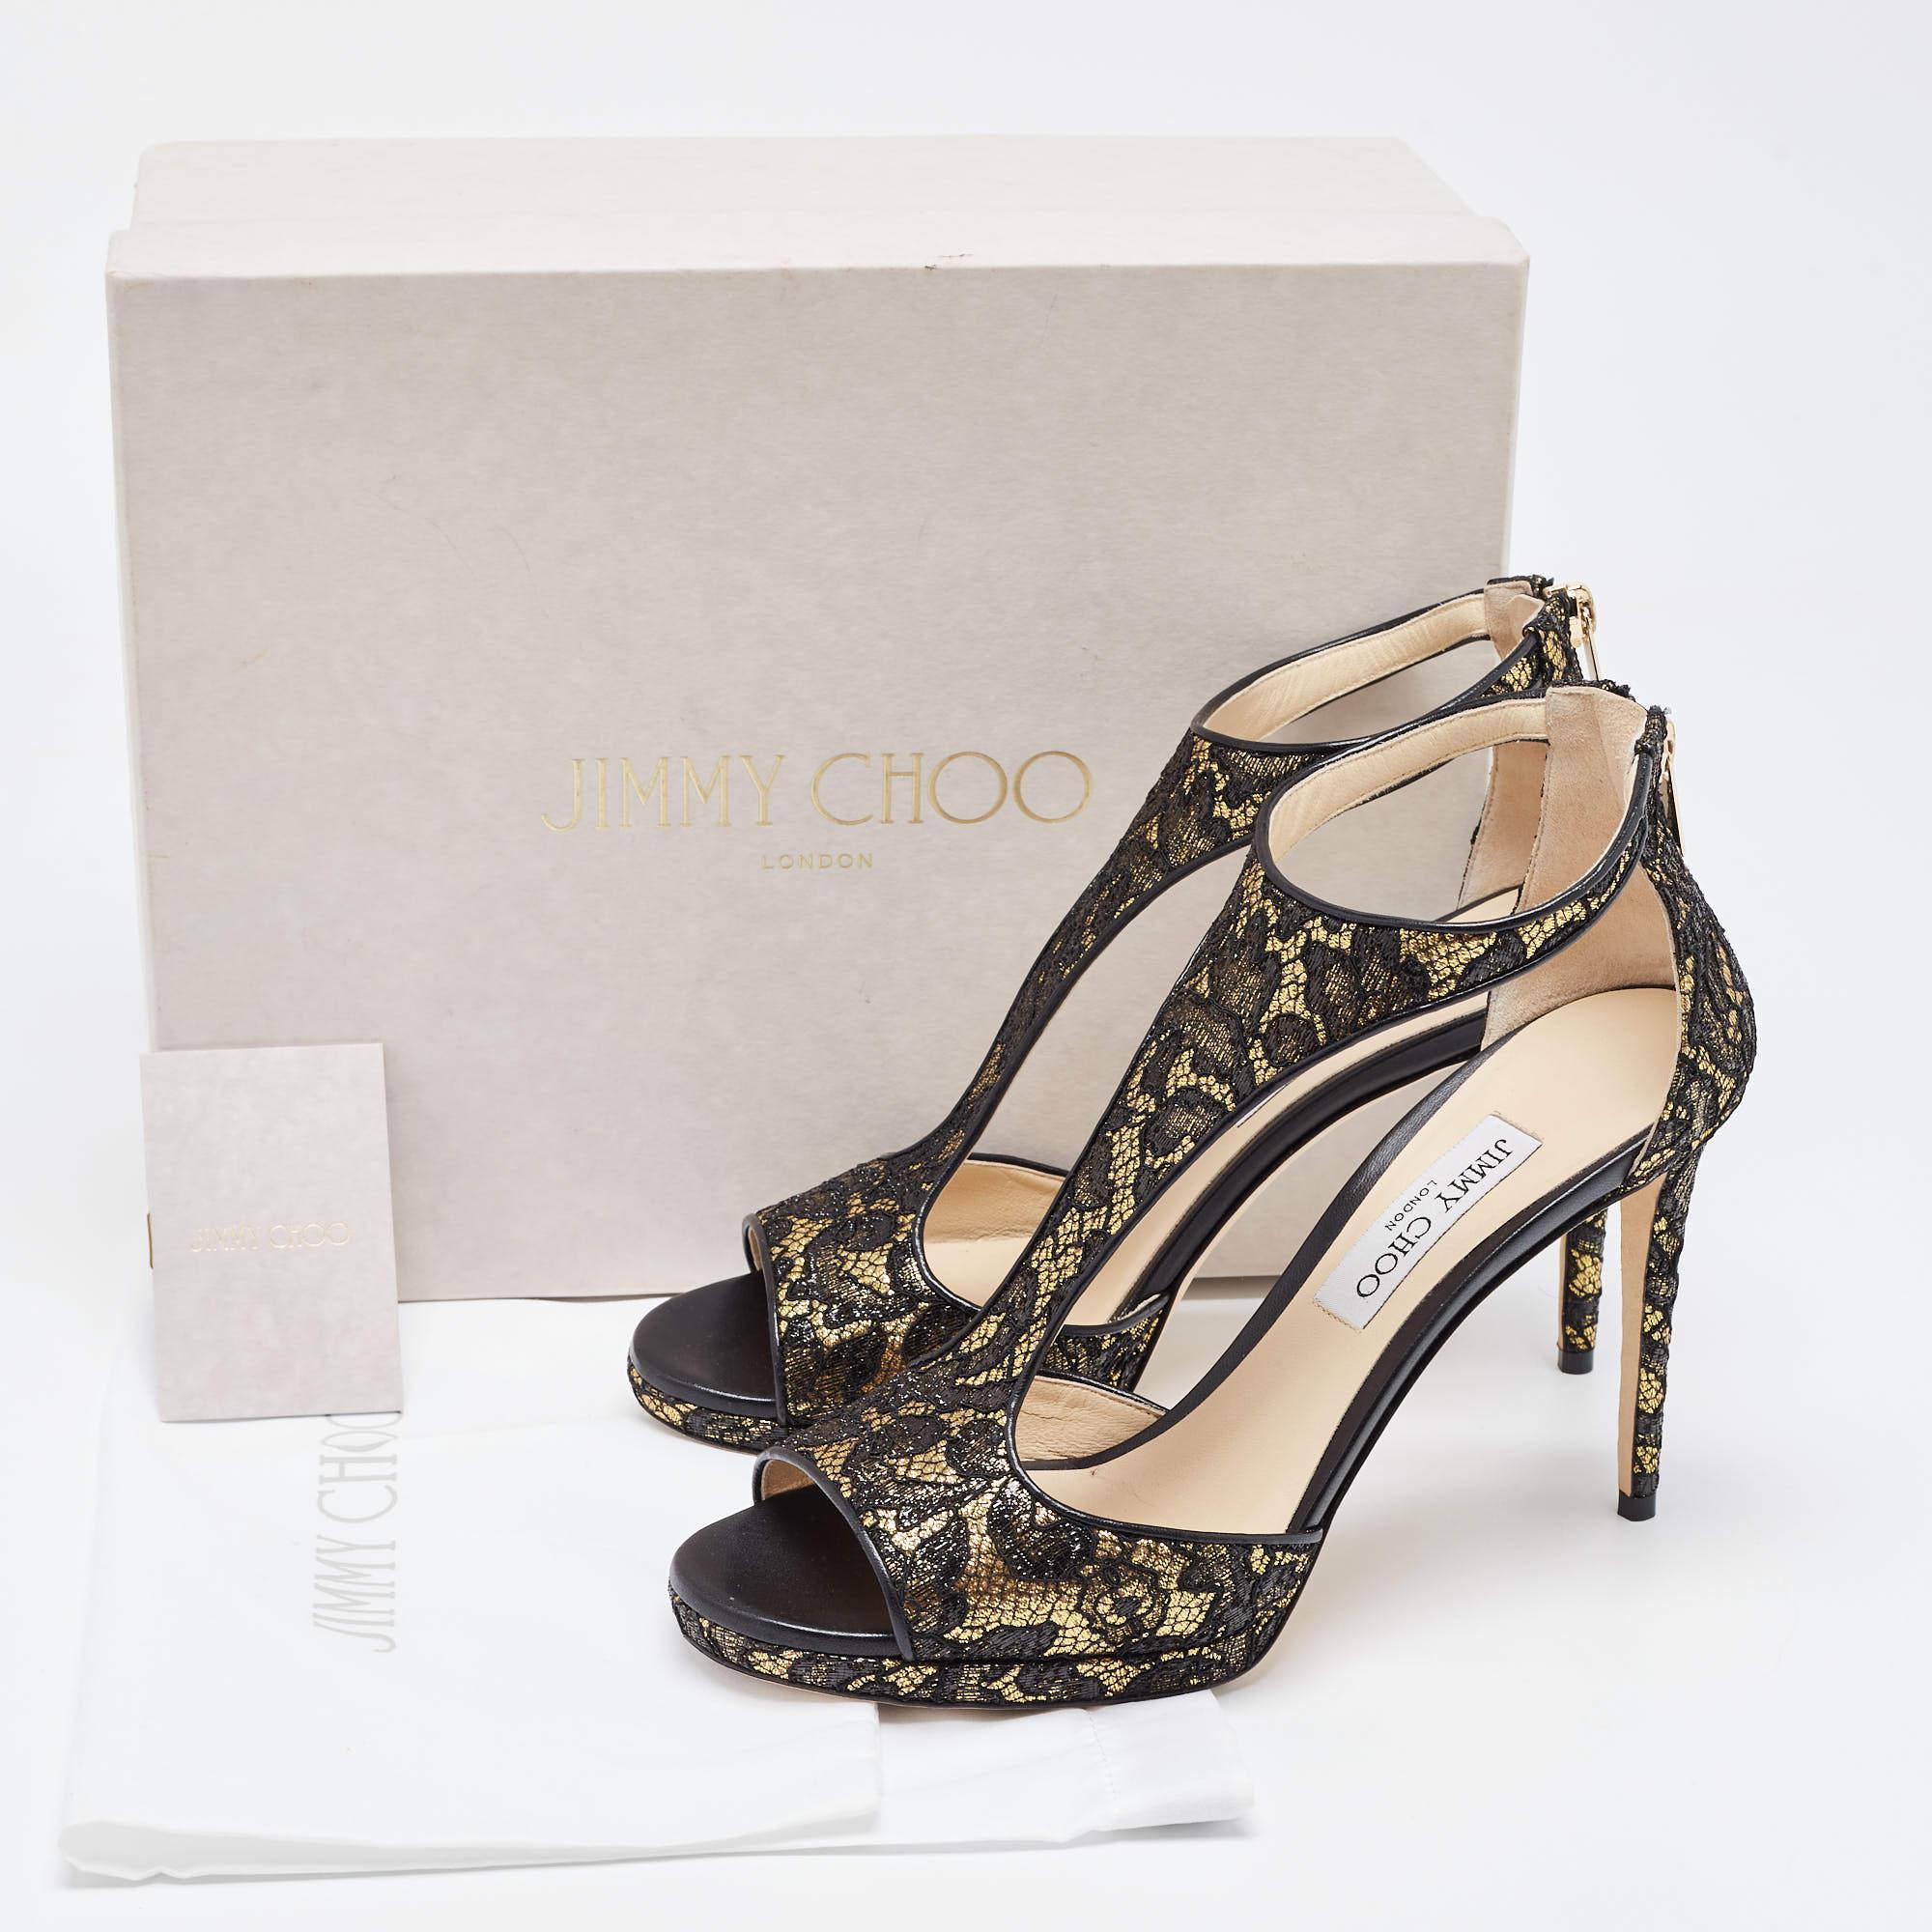 Jimmy Choo Black/Gold Lace and Leather Lana Sandals Size 41 For Sale 5